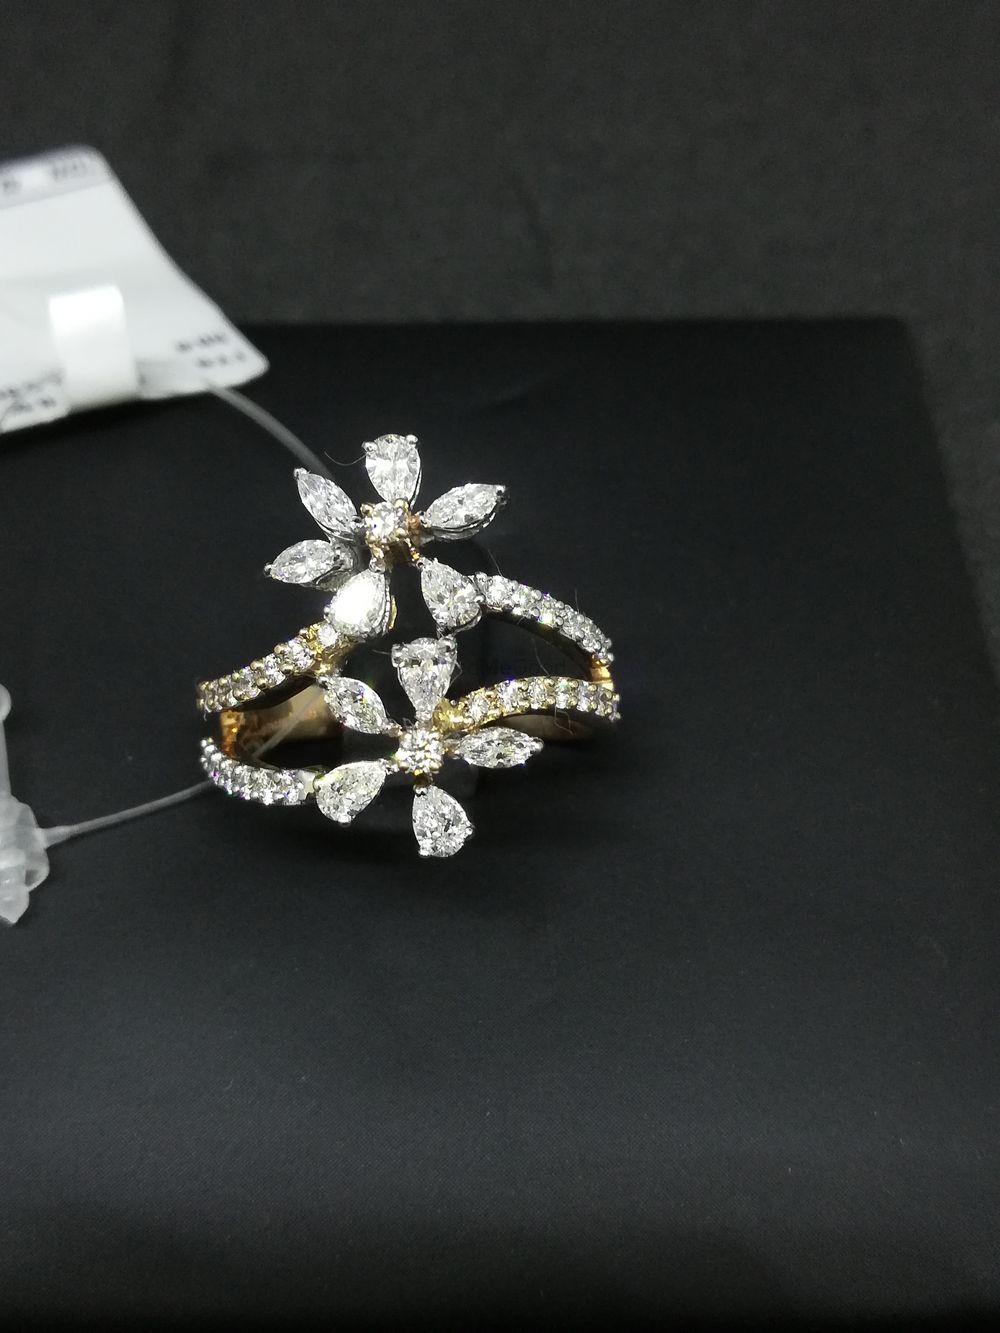 Photo From for clients - By Flaming Om Diamond Jewellery 